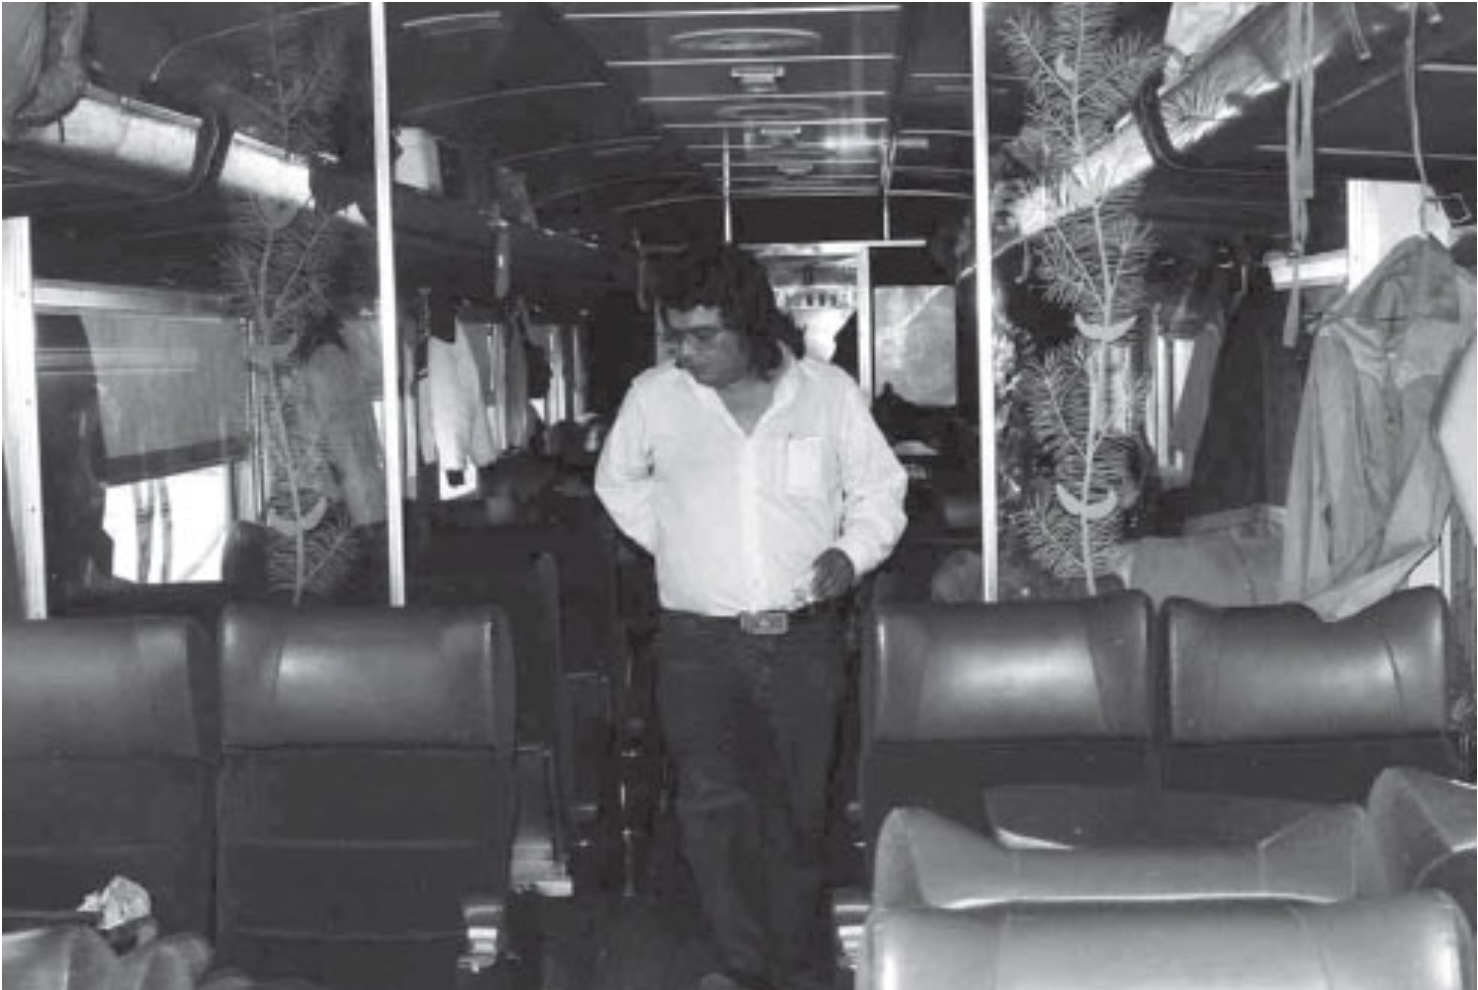 Chief Robert (Bobby) Manuel on the Constitution Express in November 1980